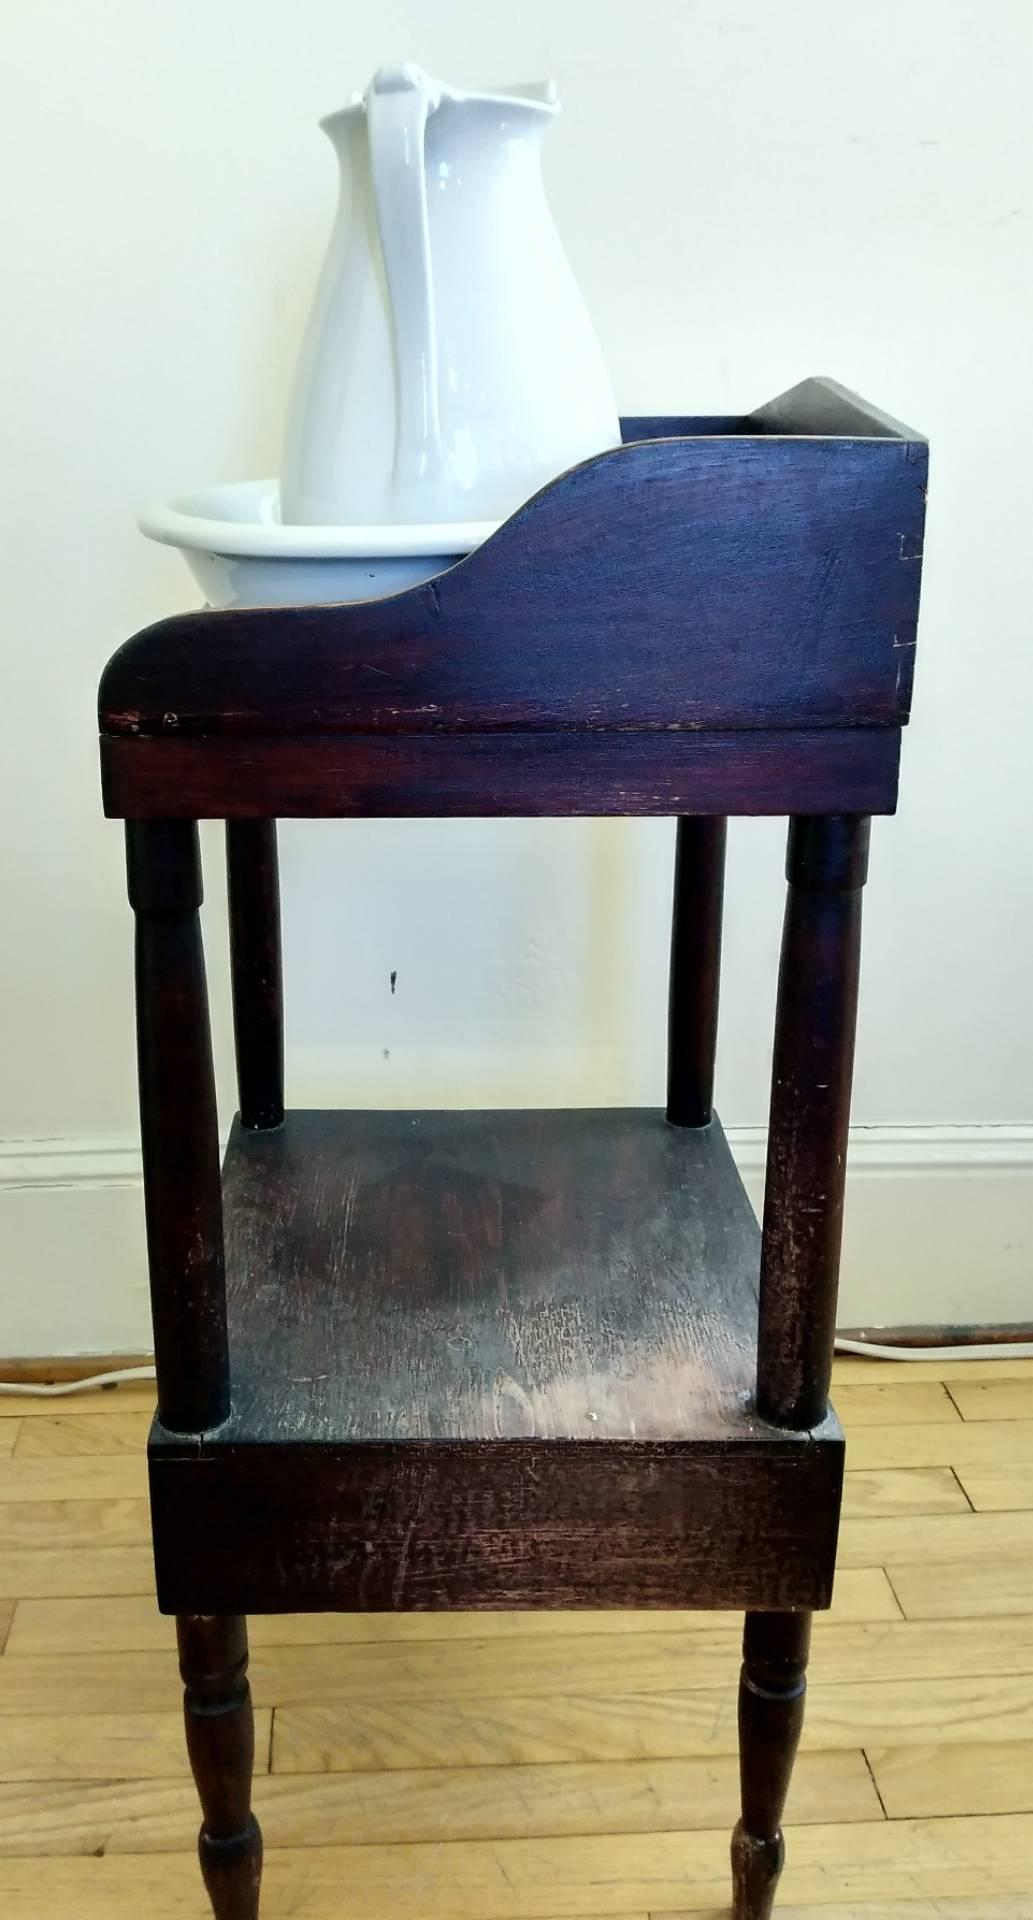 wash bowl and pitcher stand